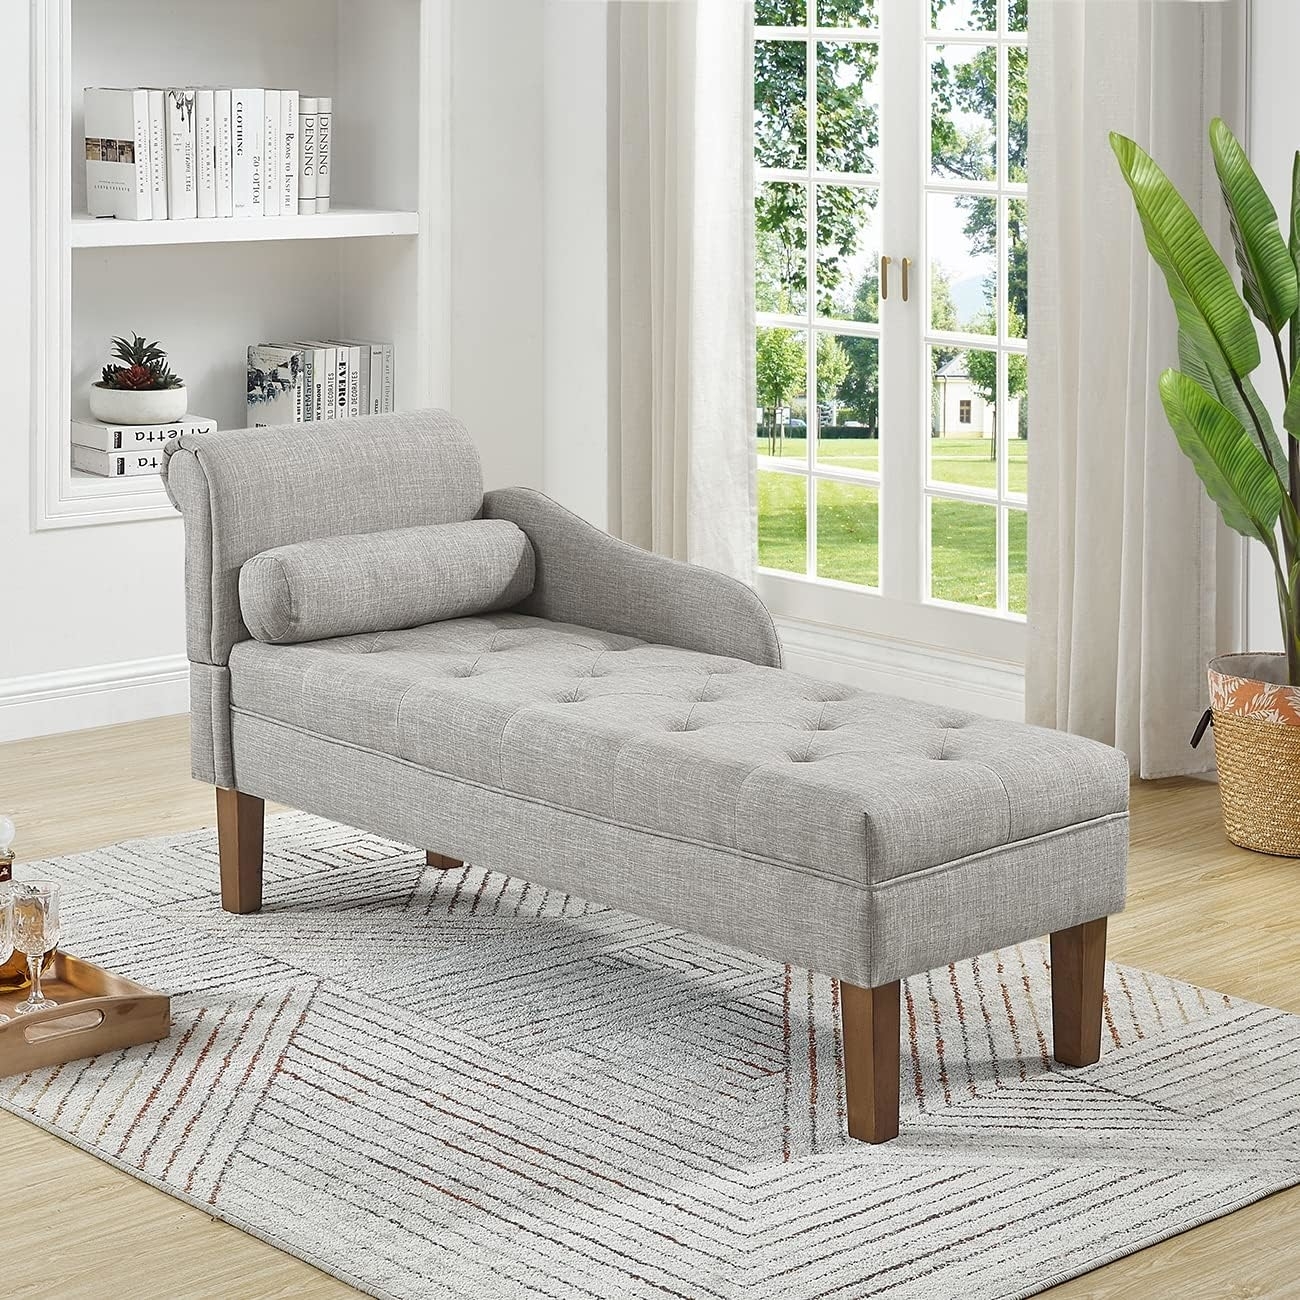 the gray chaise lounge in a living room